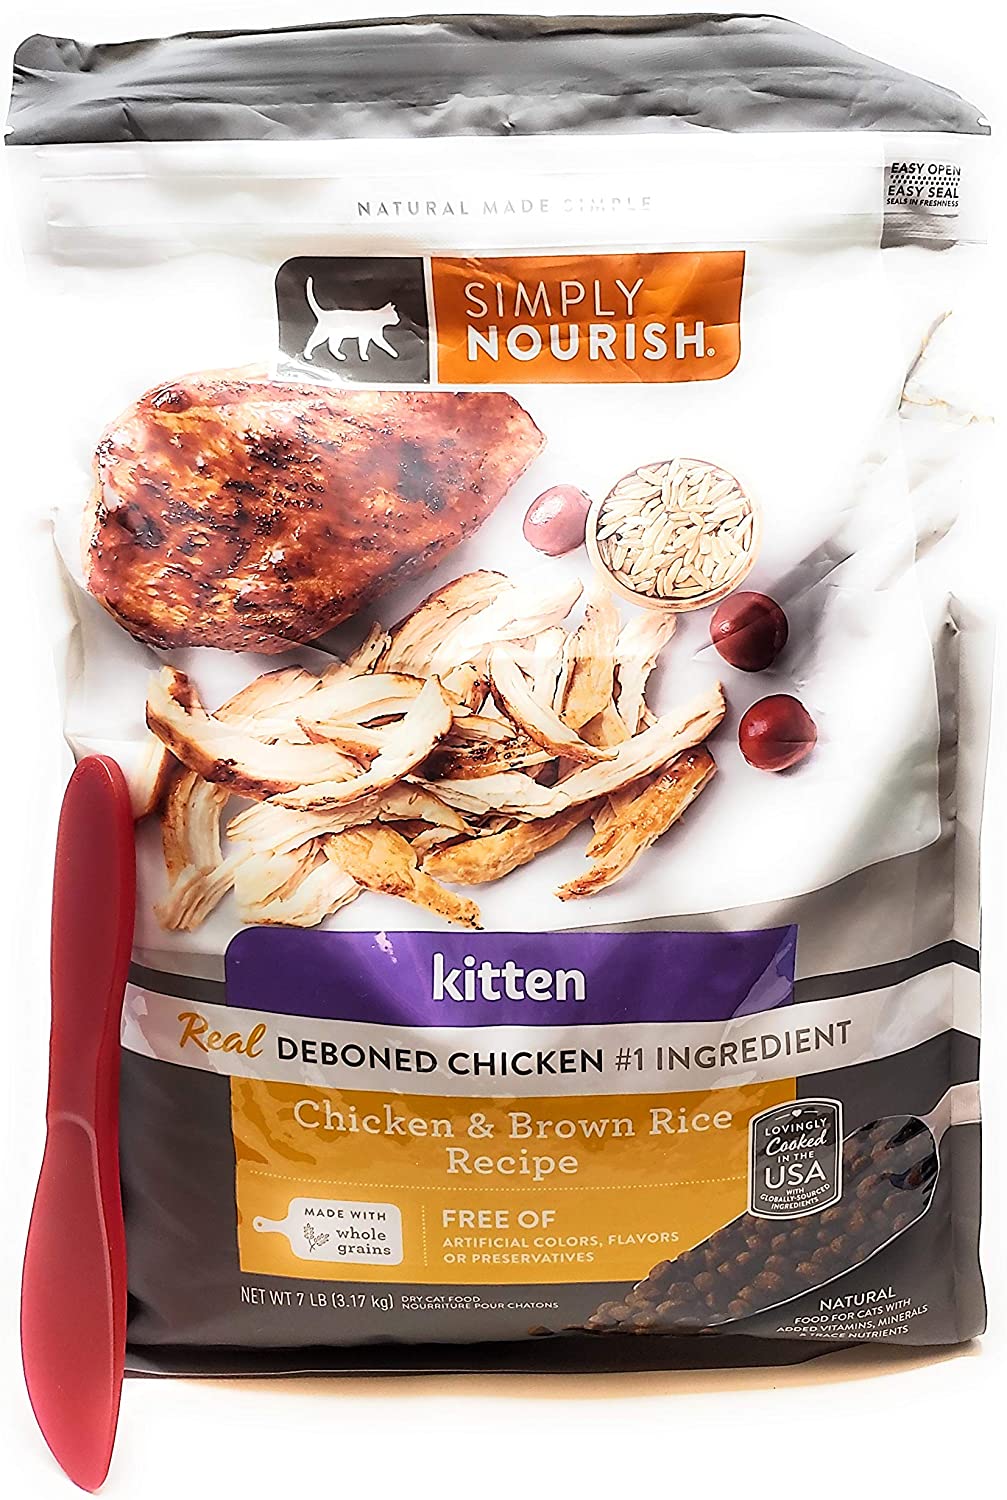 Simply nourish kitten chicken and brown rice dry cat food 